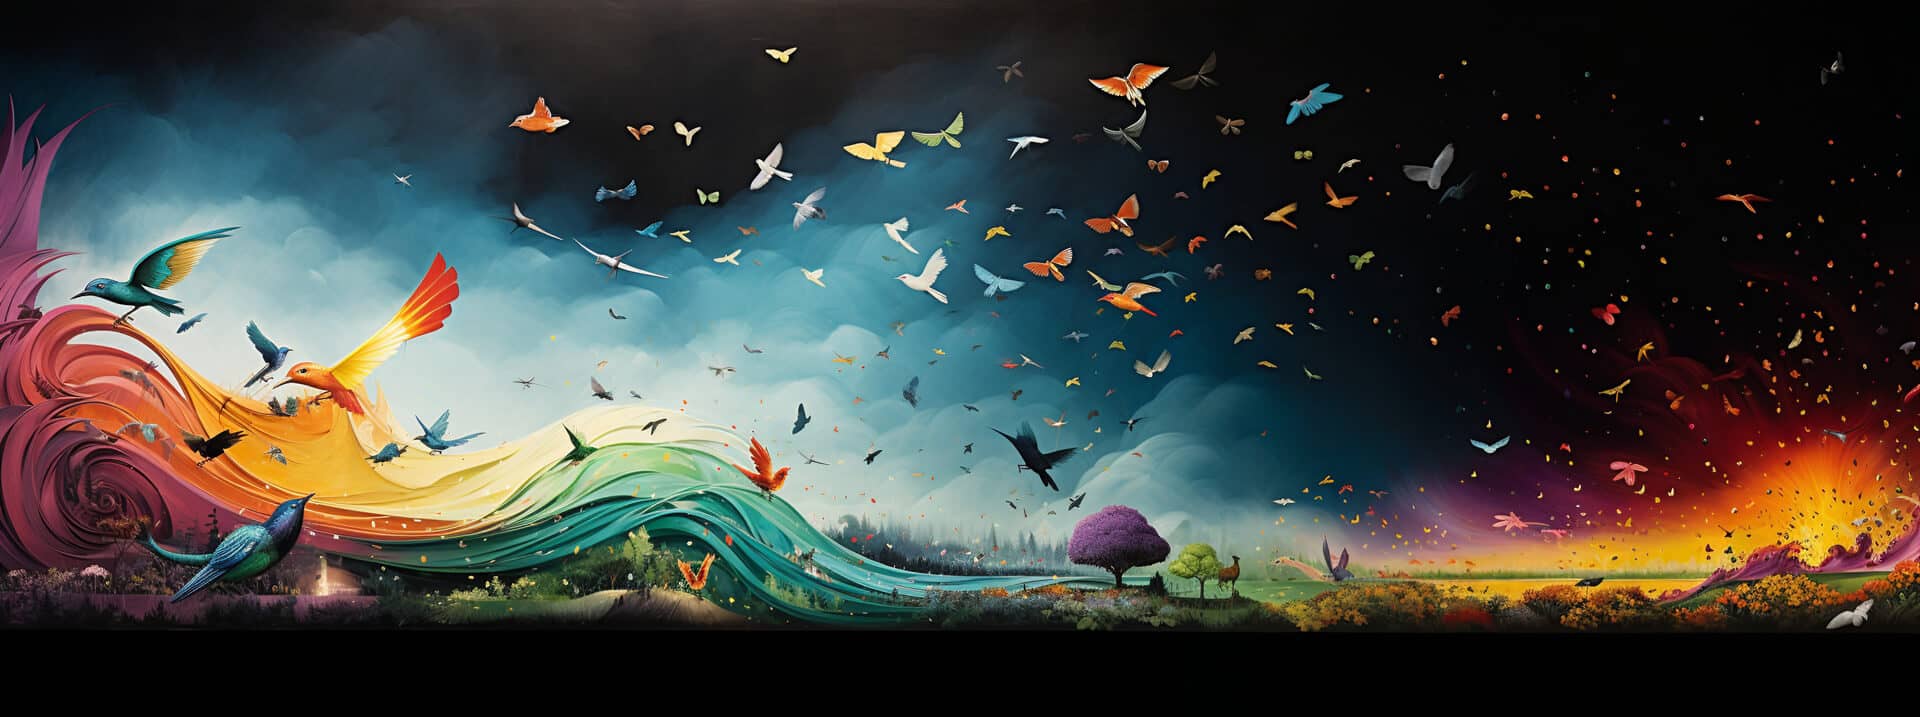 how to suffer less embracing the spiritual journey photograph with butterflies illustration 1